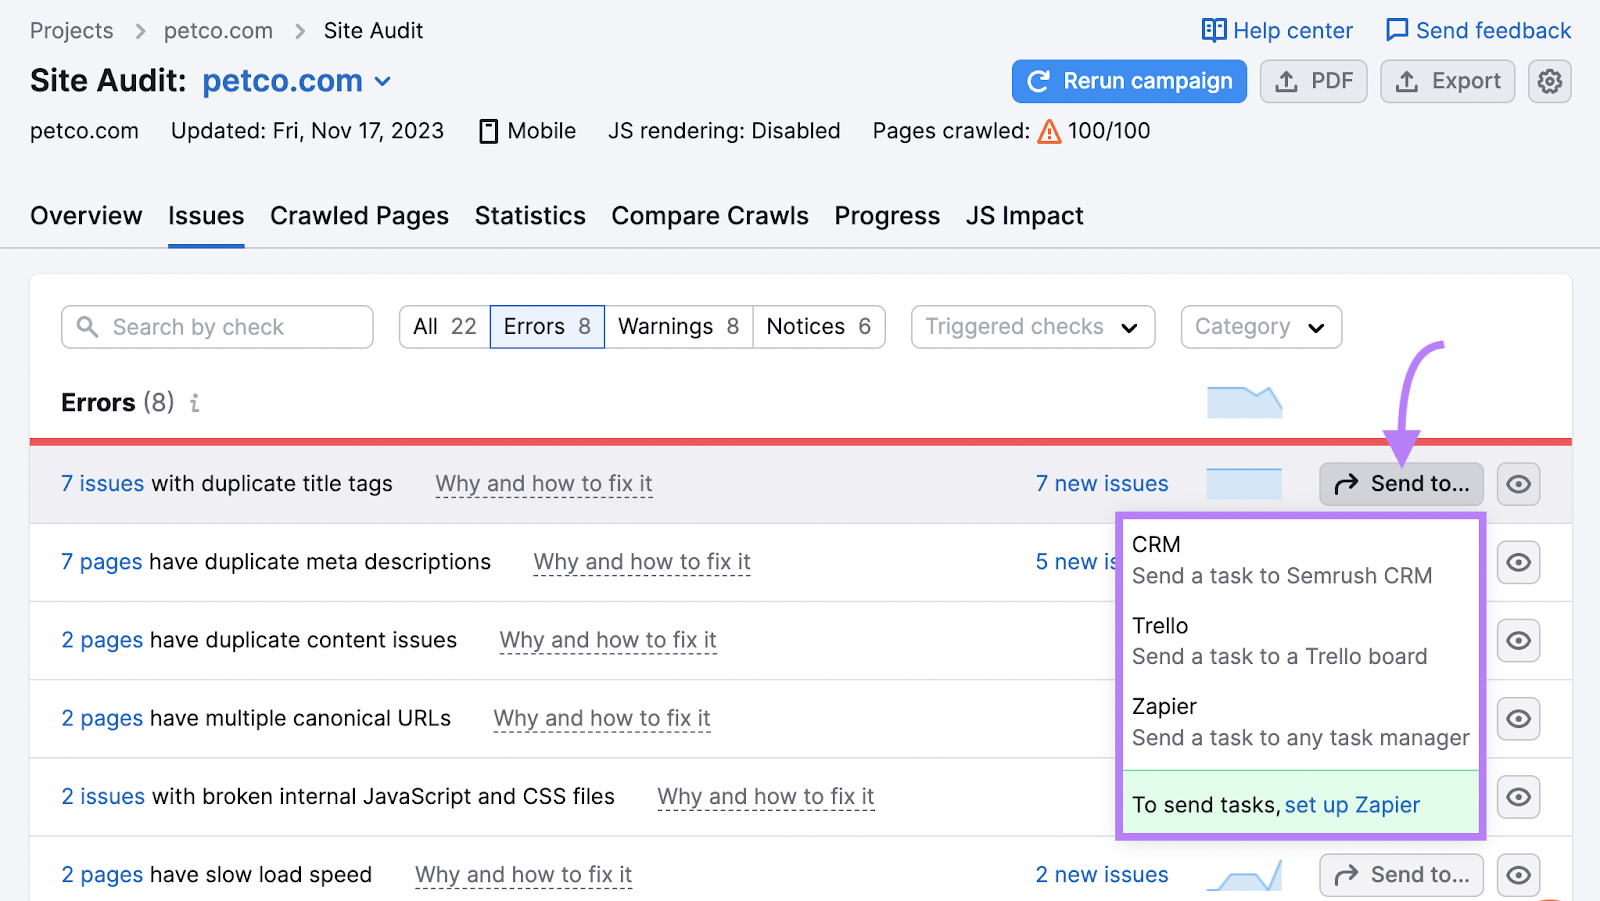 Send issues from Site Audit to Semrush CRM, Trello board or Zapier